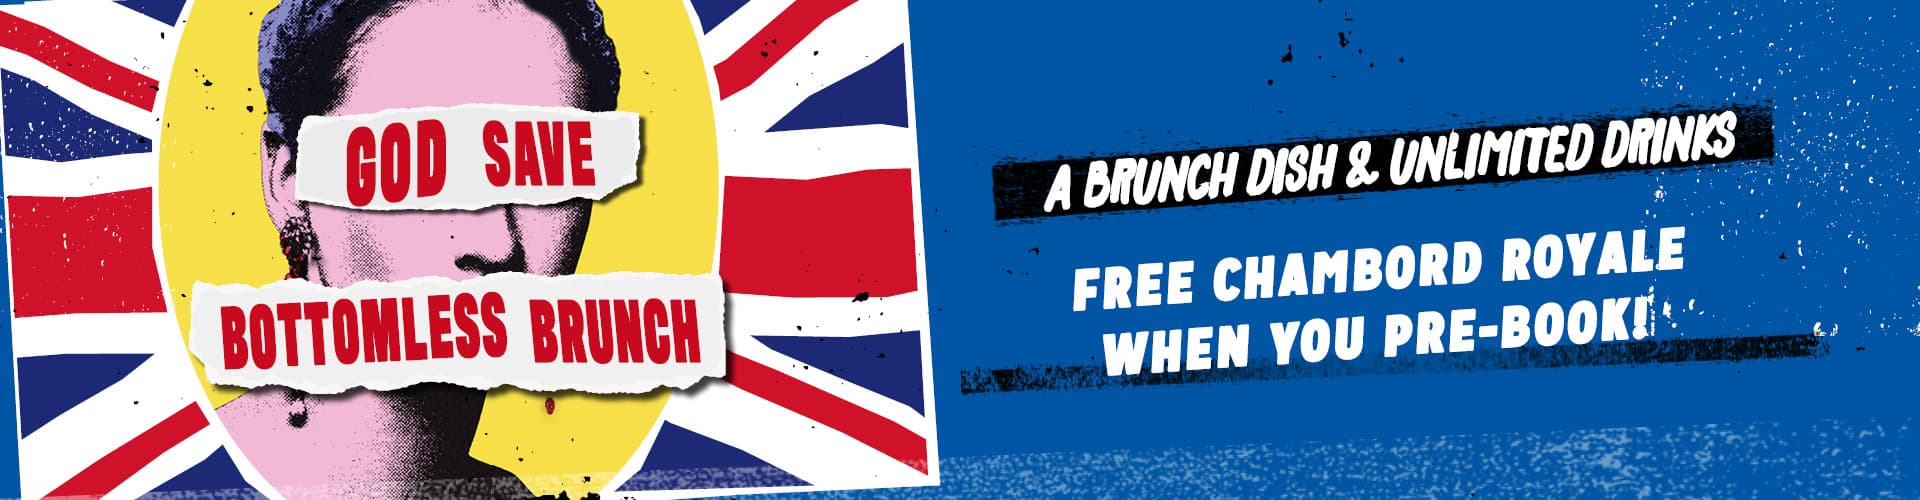 God Save Bottomless Brunch - A Brunch Dish & Unlimited Drinks. Free Chambord Royale when you book!